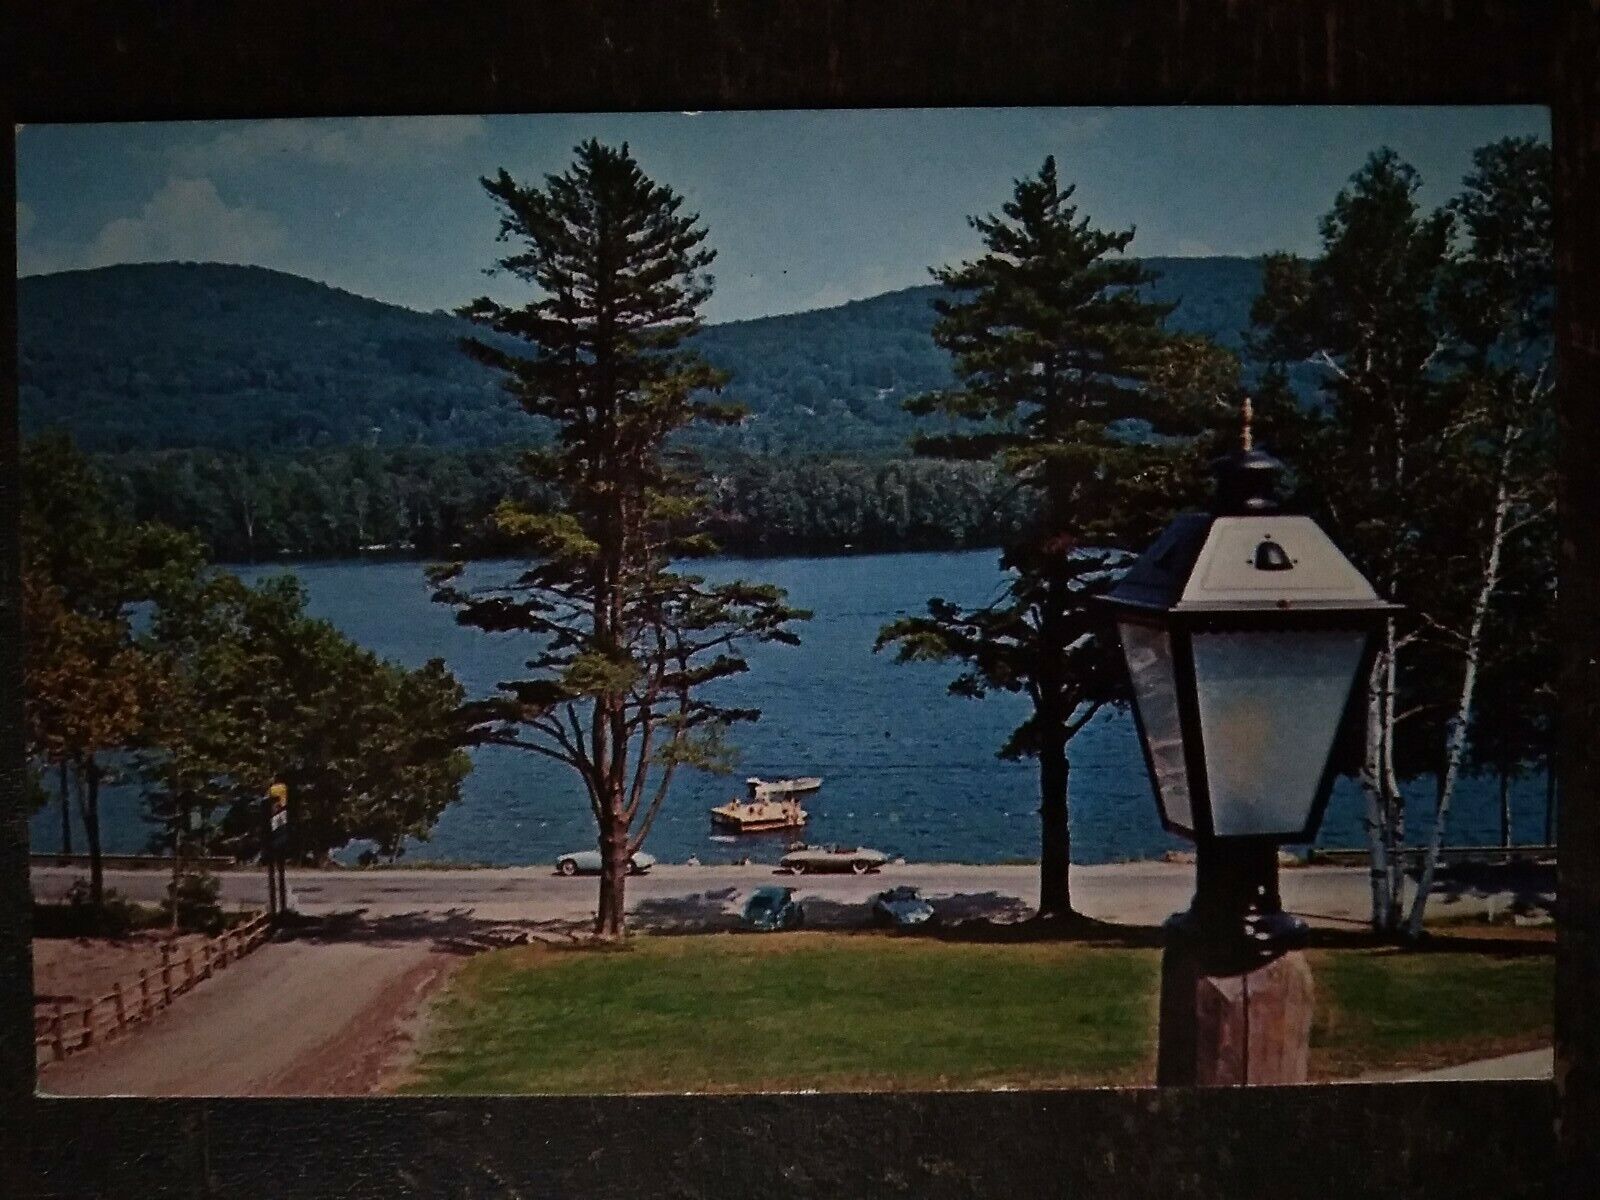 Bathing Beach as seen from The Quechee Lake Motel-Inn, Canaan, NY - Mid 1900s